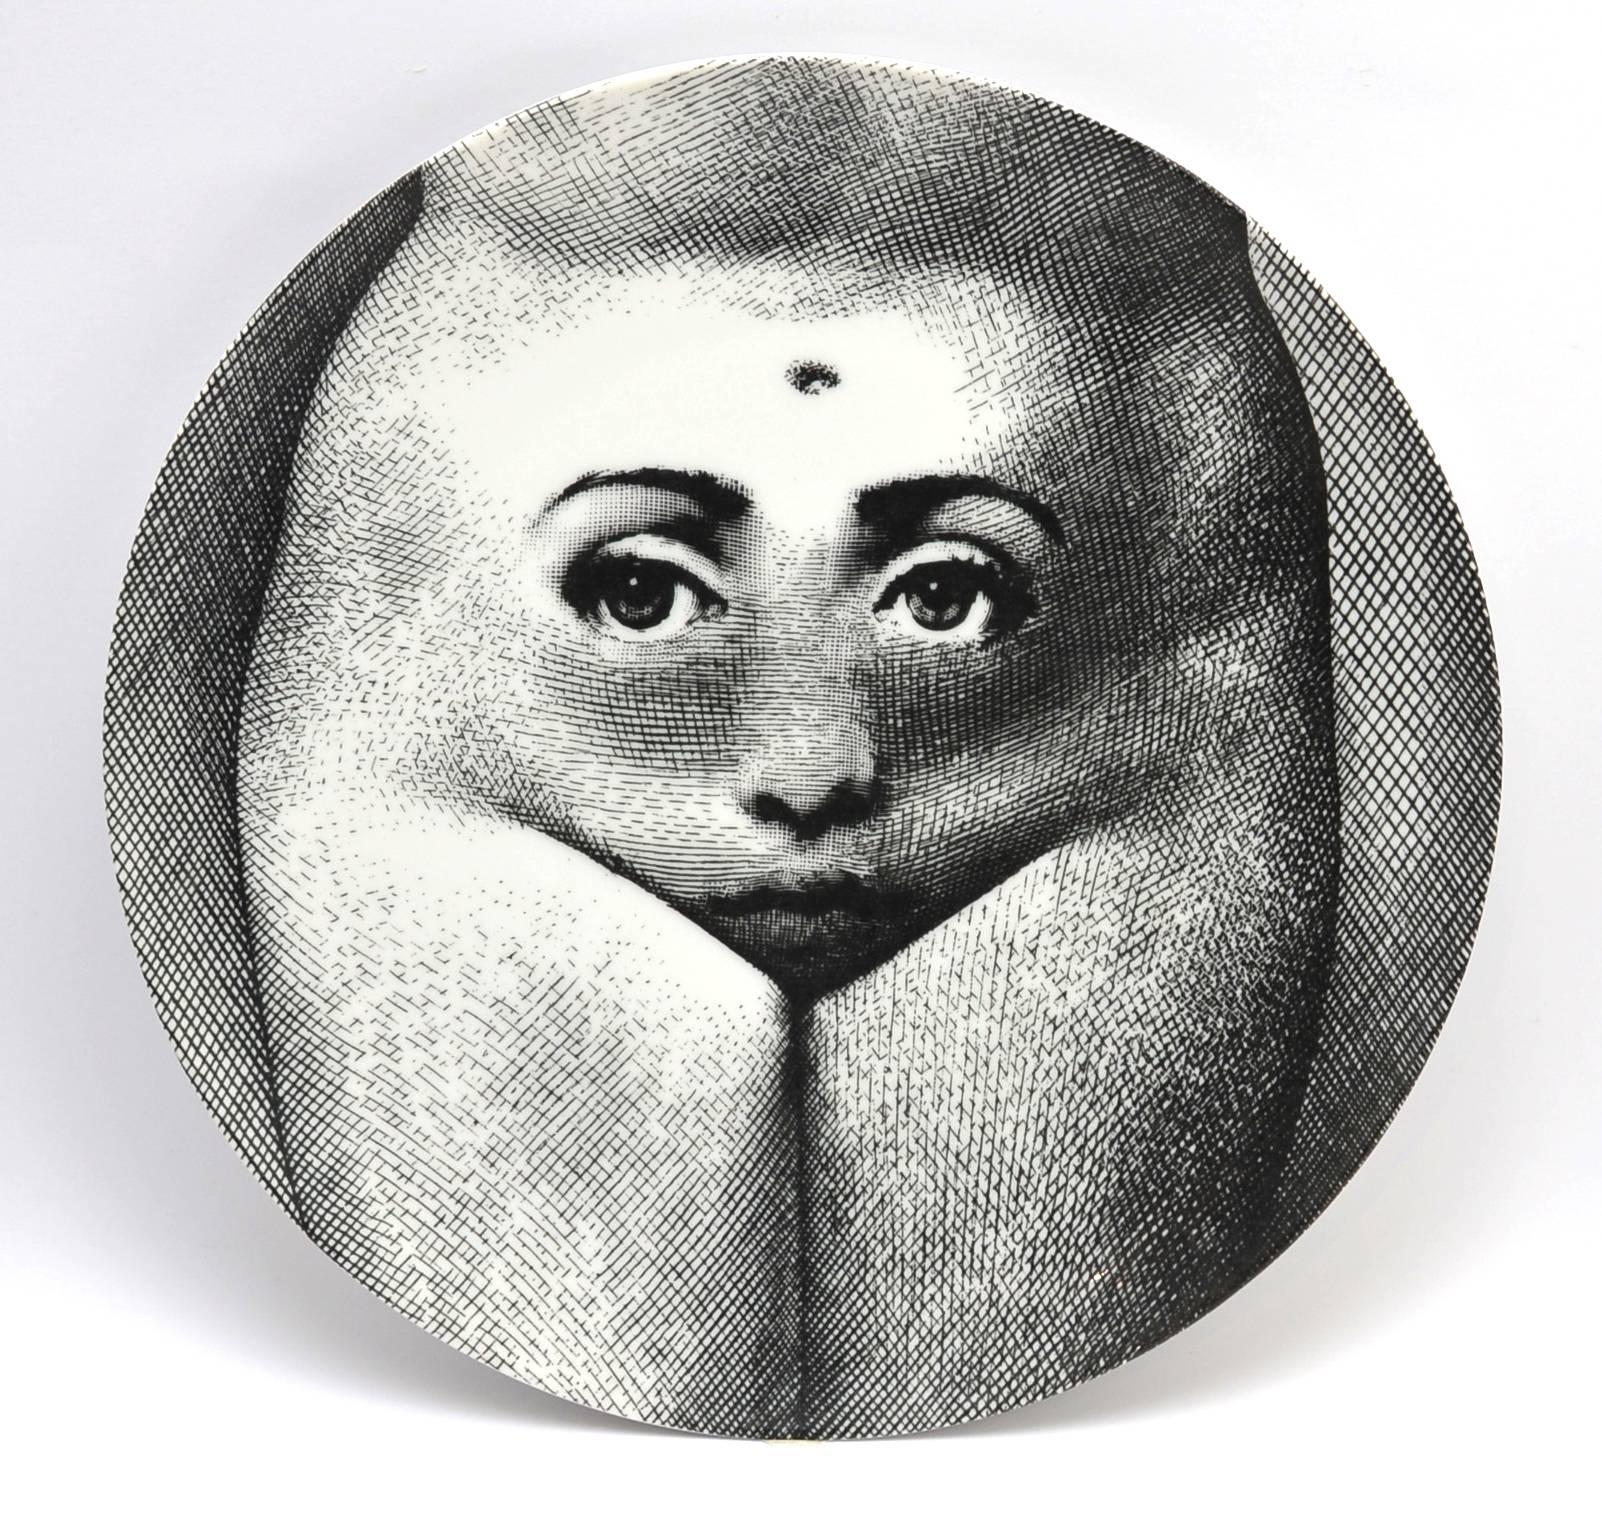 Made by Fornasetti of Milan, each marked 'Tema E Variazoni' 'Fornasetti Milano' 'Made in Italy' numbered '303' and '281' to reverse respectively, depicting the upper and lower torso of a woman respectively.